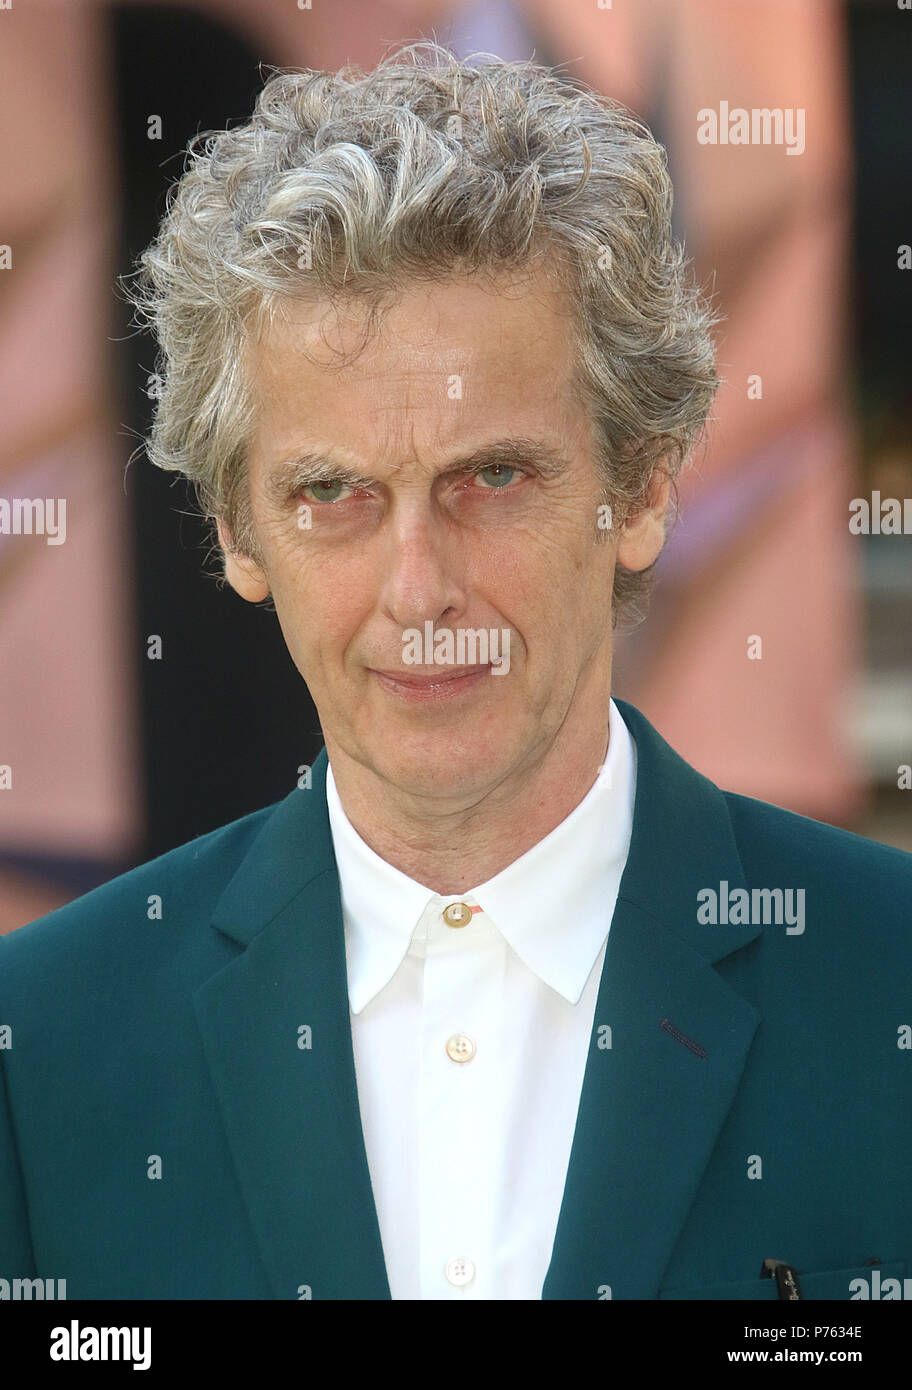 Jun 06, 2018 - Peter Capaldi attending Royal Academy Of Arts 250th Summer Exhibition Preview Party at Burlington House in London, England, UK Stock Photo